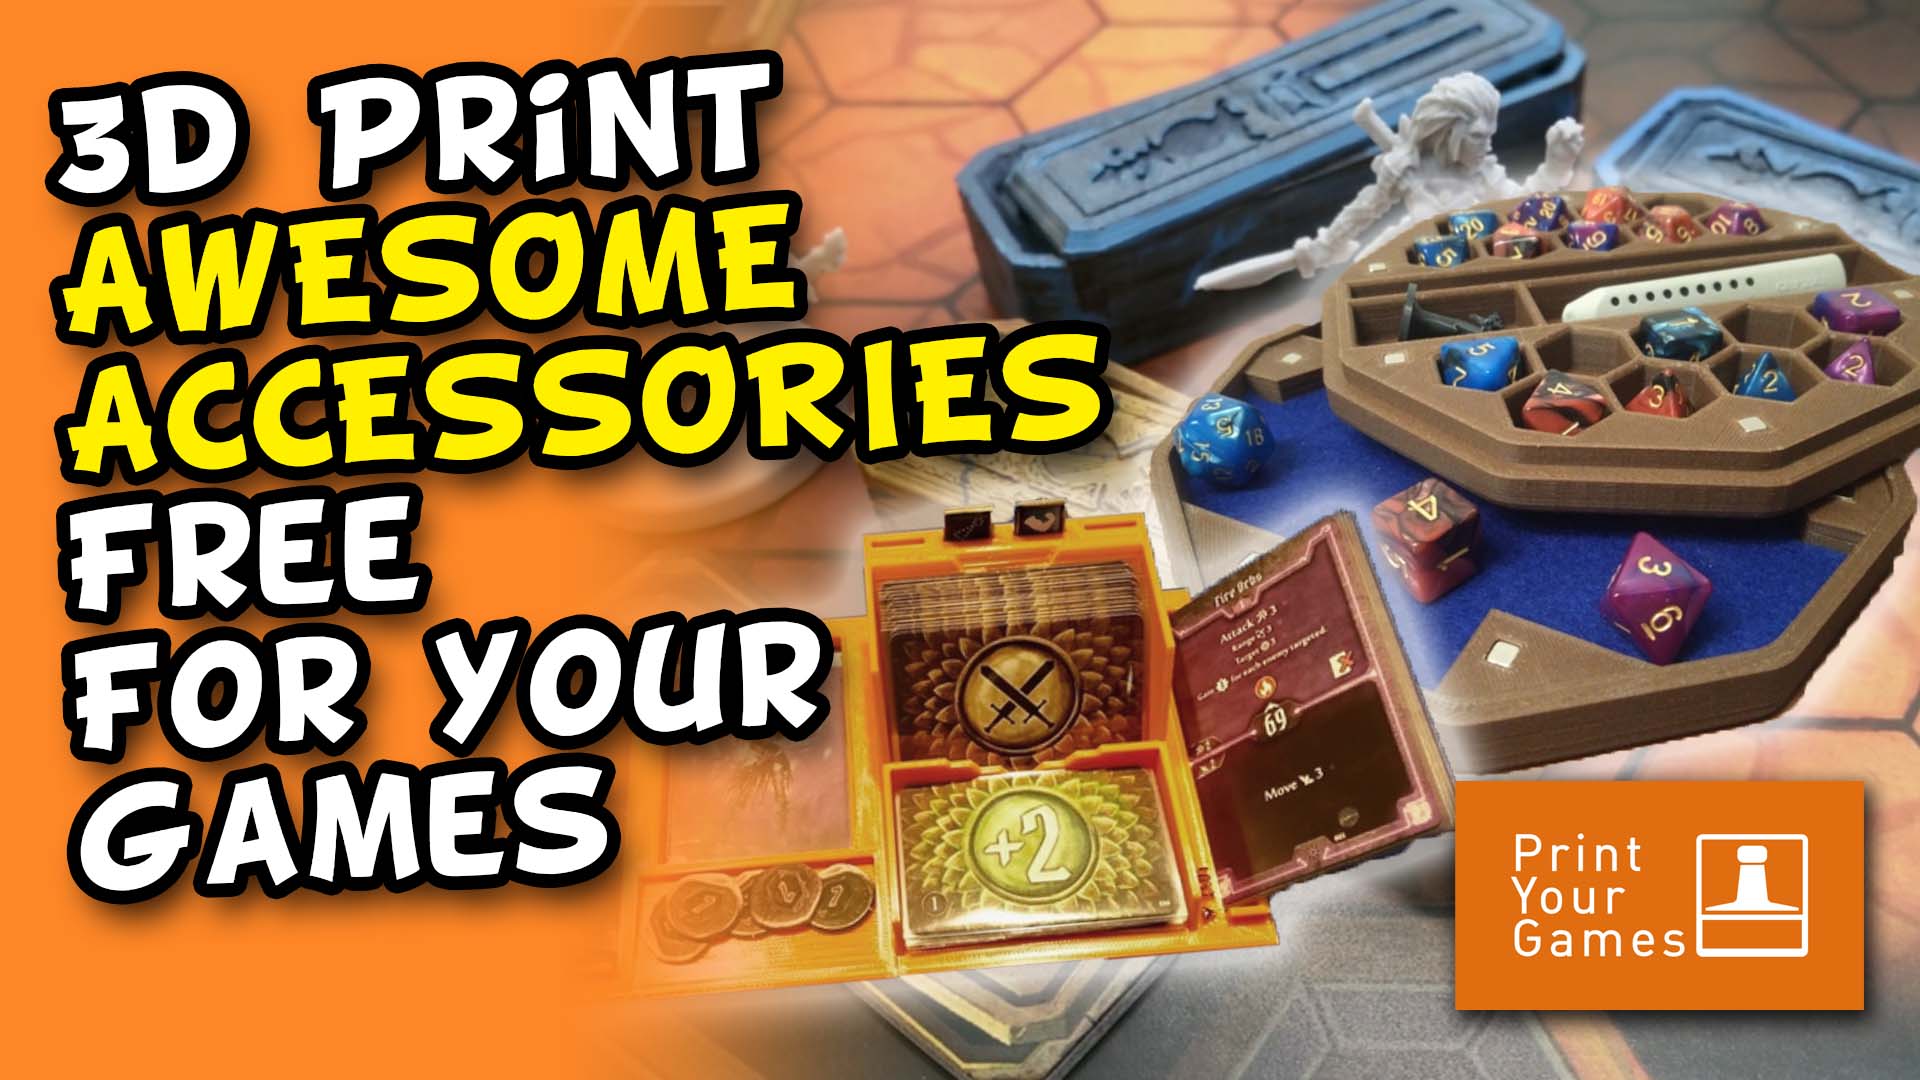 3d Print AWesome Accessories Free for Your Games - Print Your Games Podcast